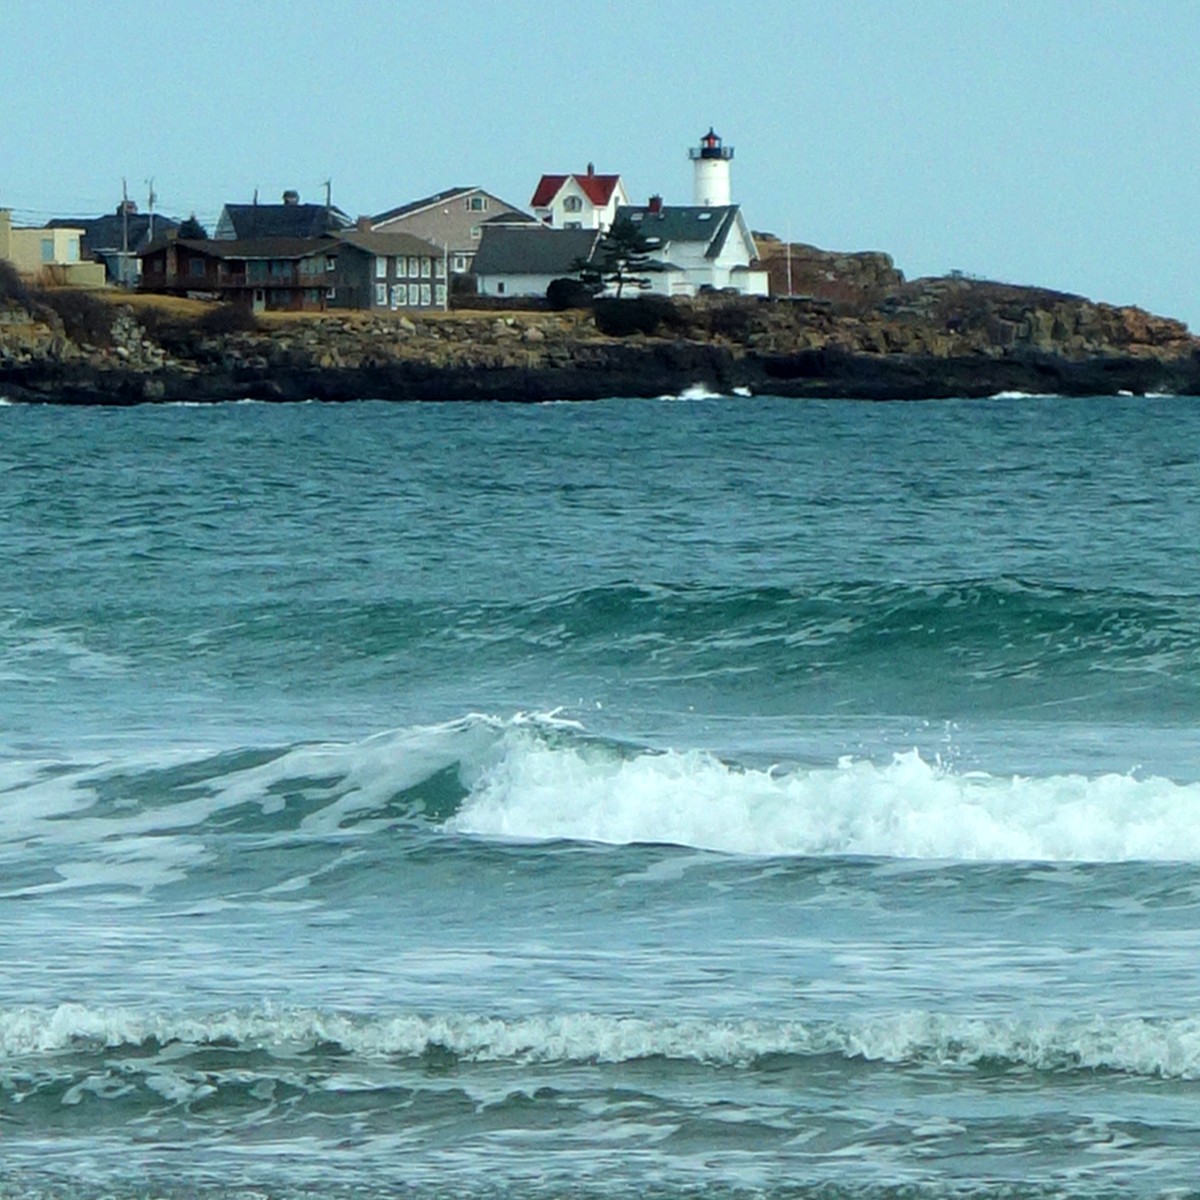 A view of Nubble Lighthouse from Long Sands Beach in York, Maine.